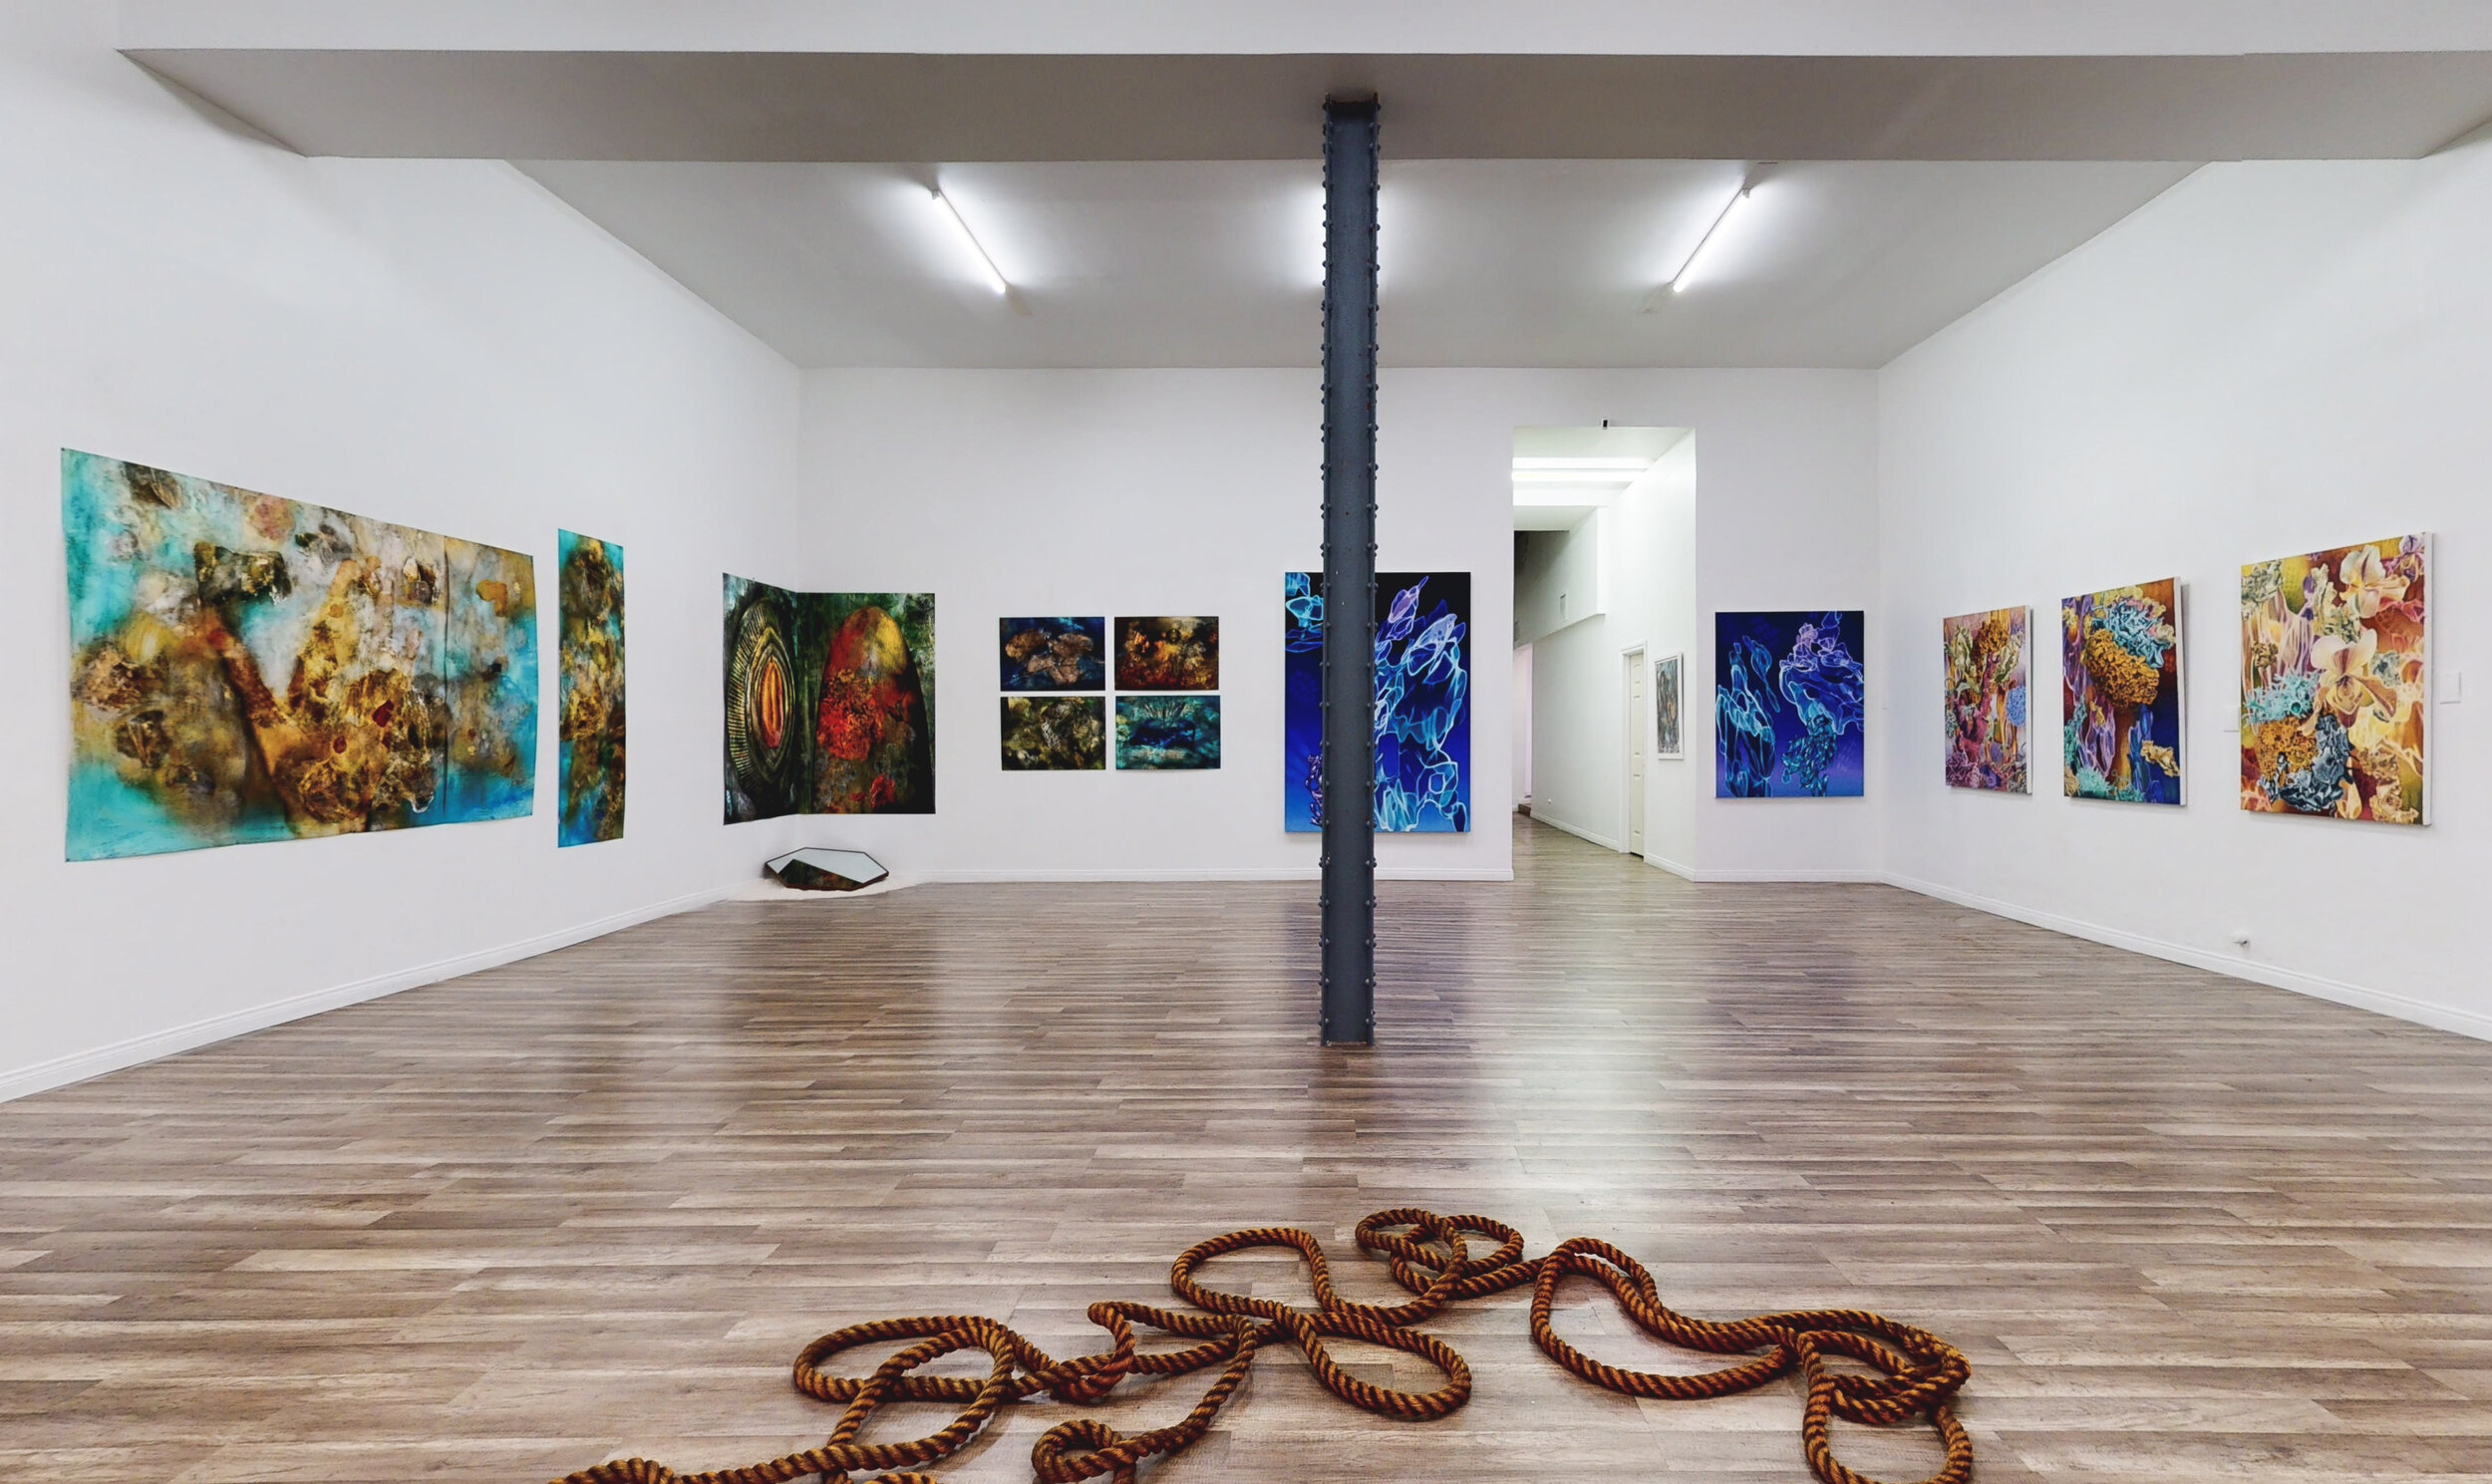 Wonzimer-Entwined-Roots-Symbiotic-Relationships-Group-Exhibition-05142021_091144.jpg